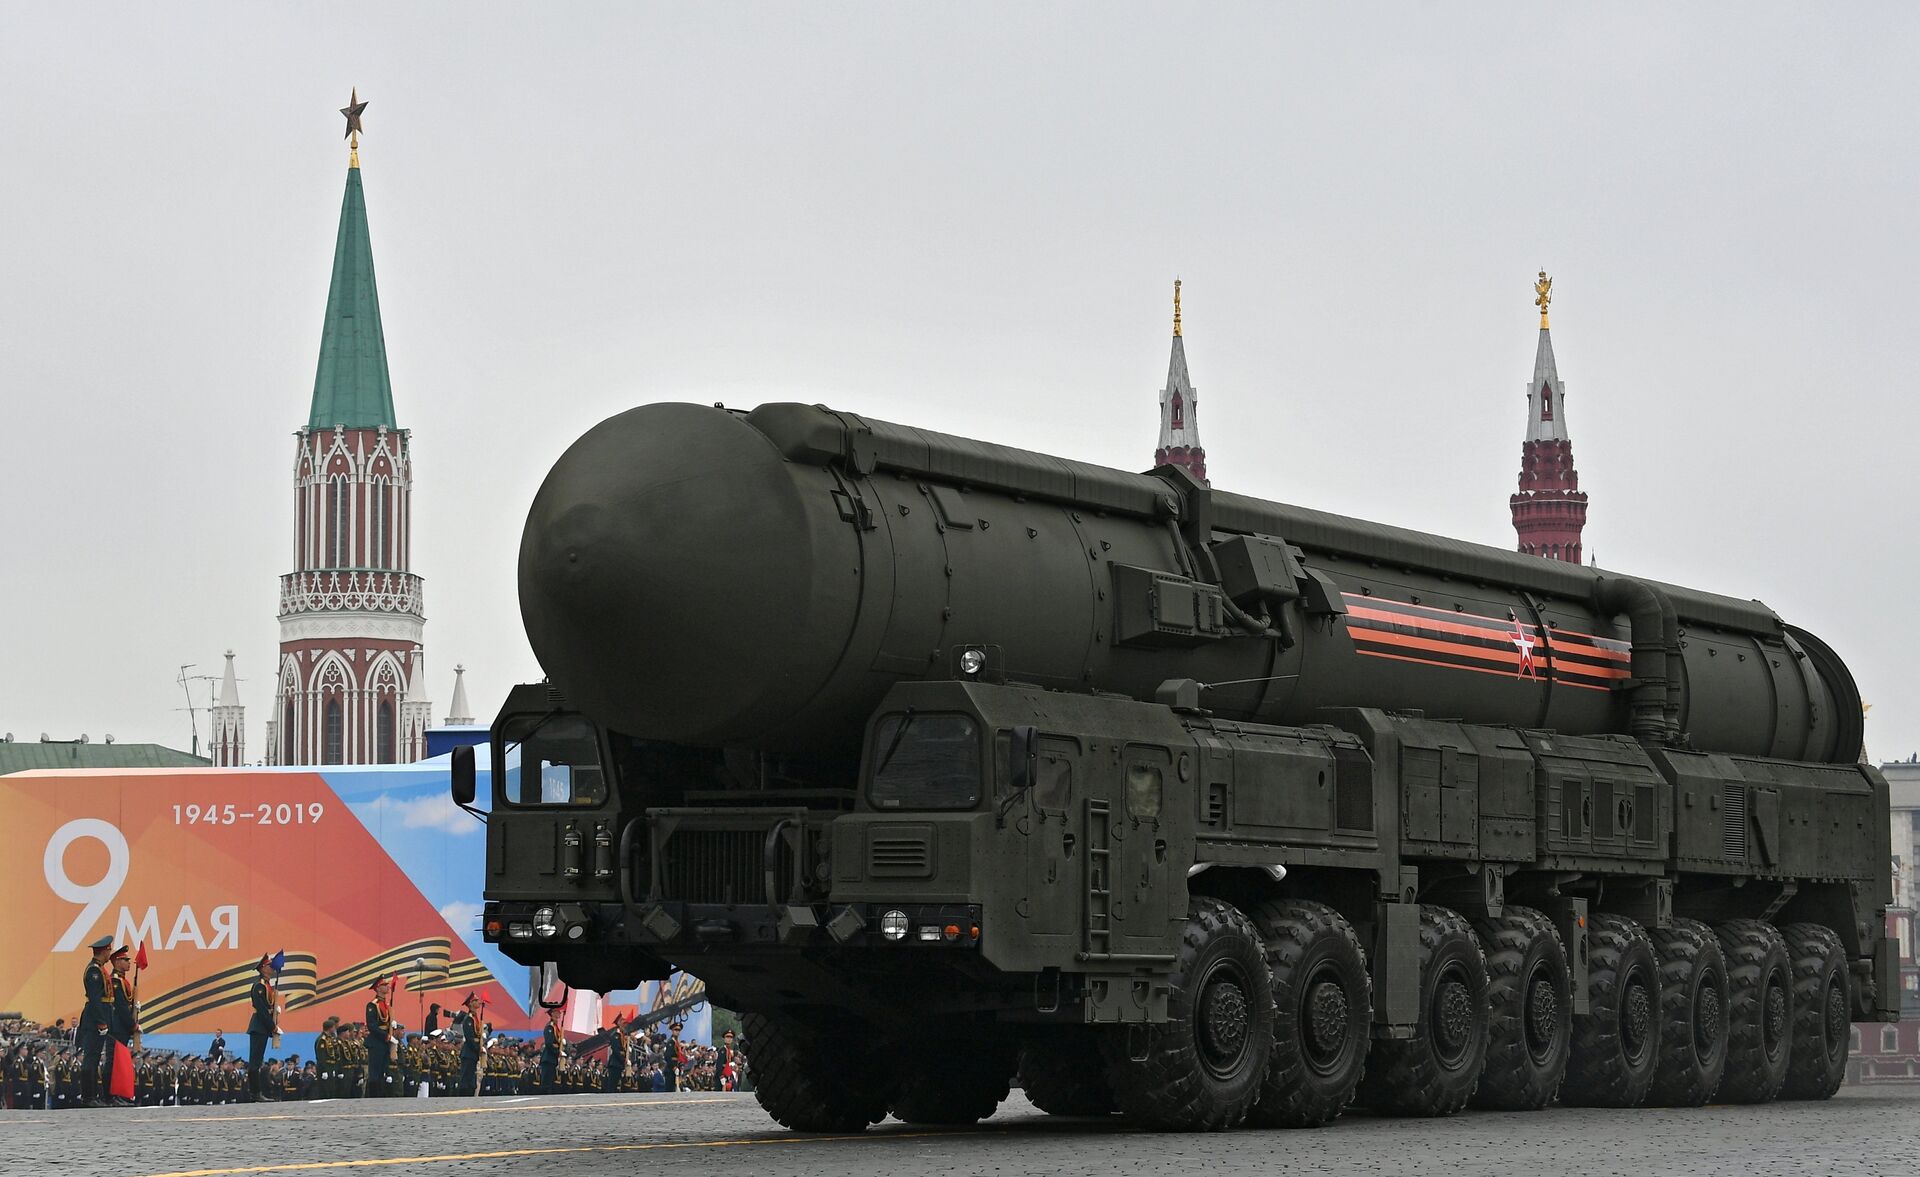 A Russian RS-24 Yars intercontinental ballistic missile system rolls down the Red Square during the Victory Day parade in Moscow on 9 May, 2019 - Sputnik भारत, 1920, 17.12.2023